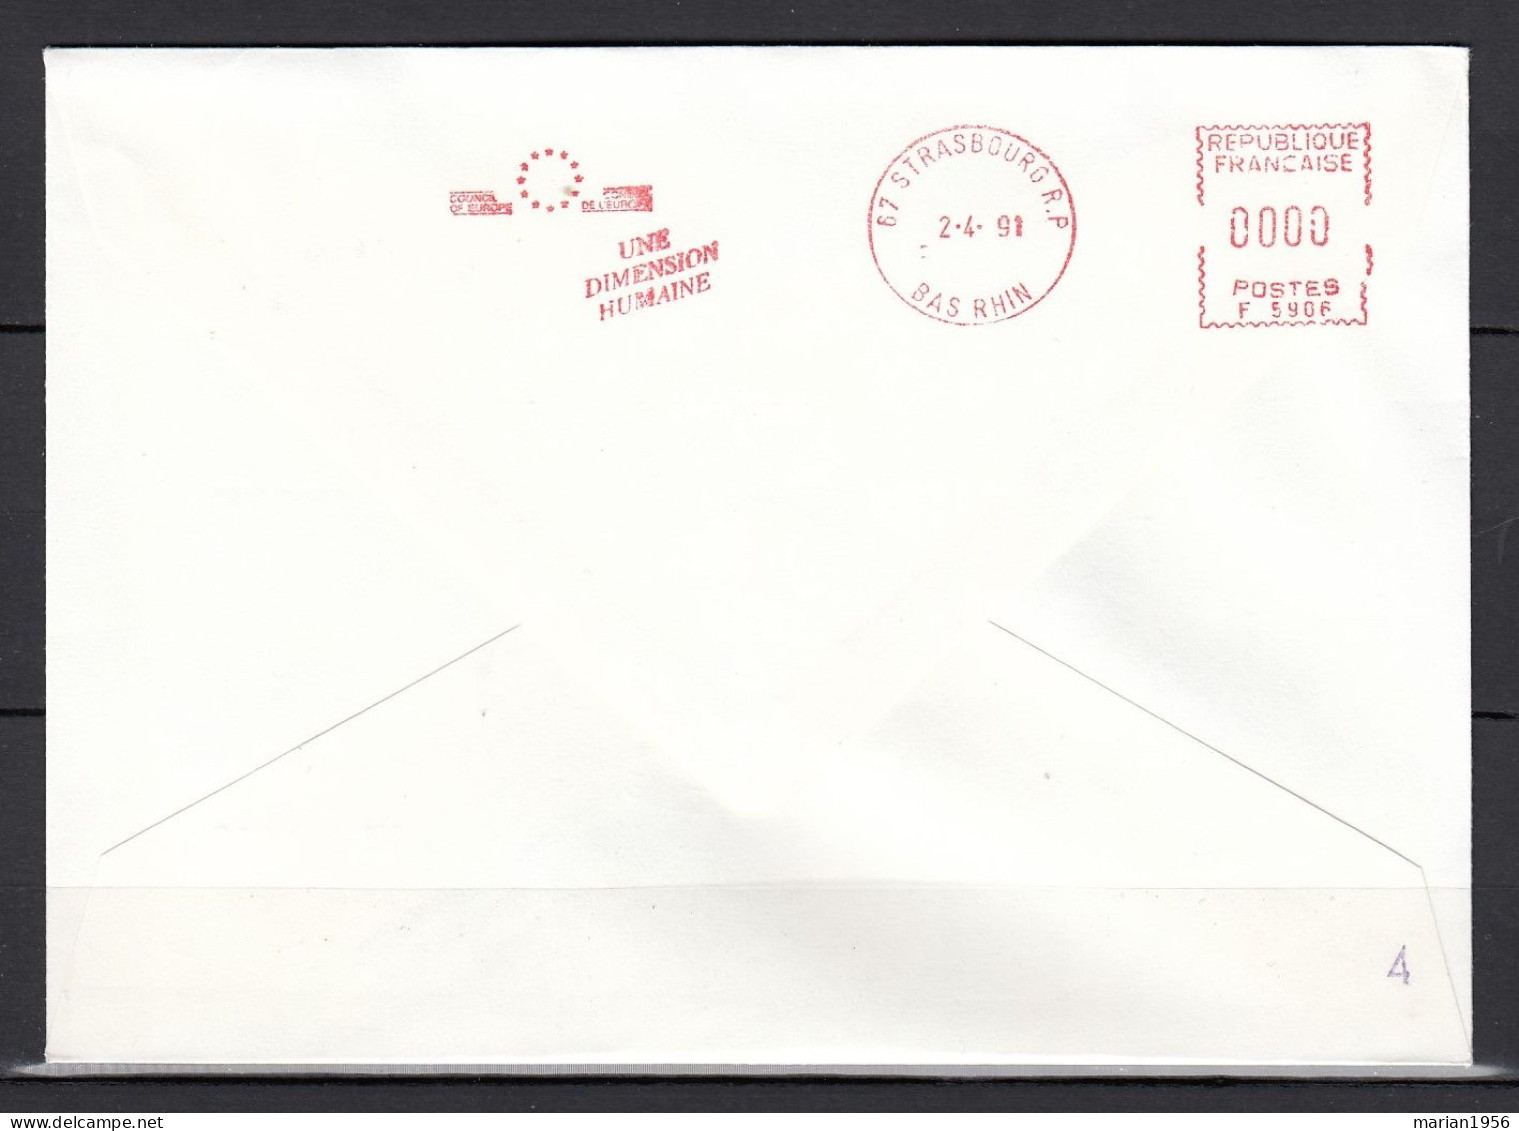 Hongrie 1991 - FDC Special - EUROPA CEPT - Europe Spatiale - Tirage Limite A 60 Ex.numerotes - 1991